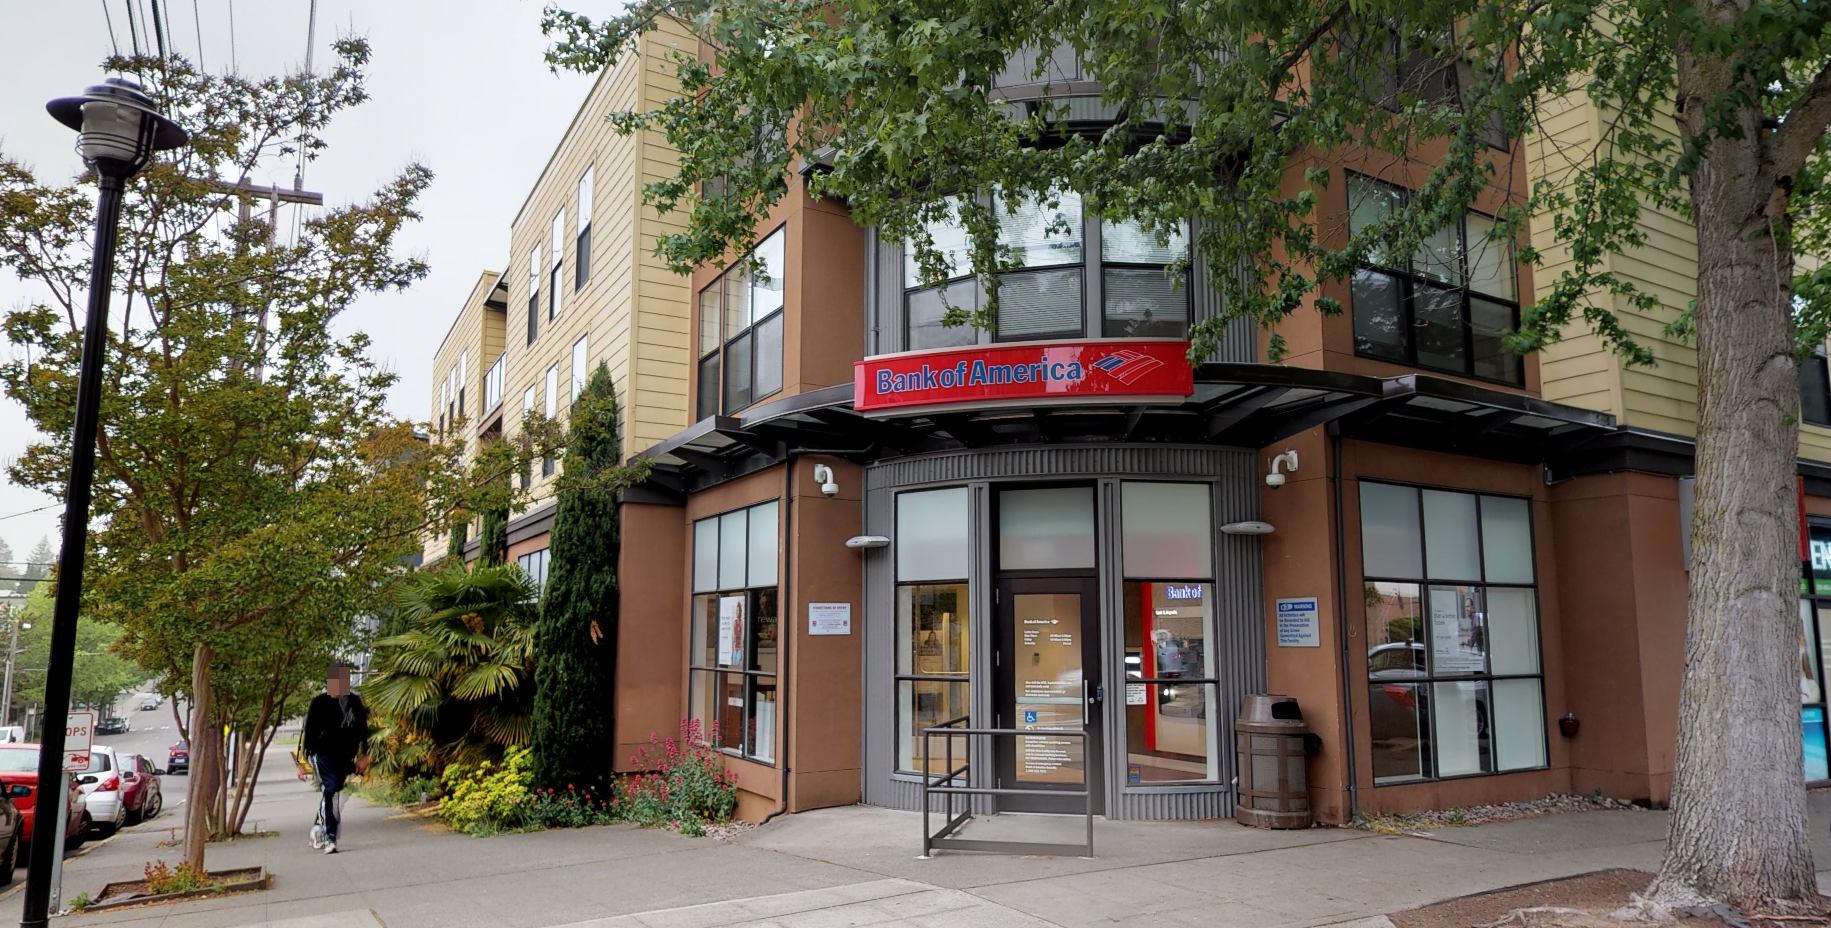 Bank of America financial center with walk-up ATM | 1501 Queen Anne Ave N, Seattle, WA 98109